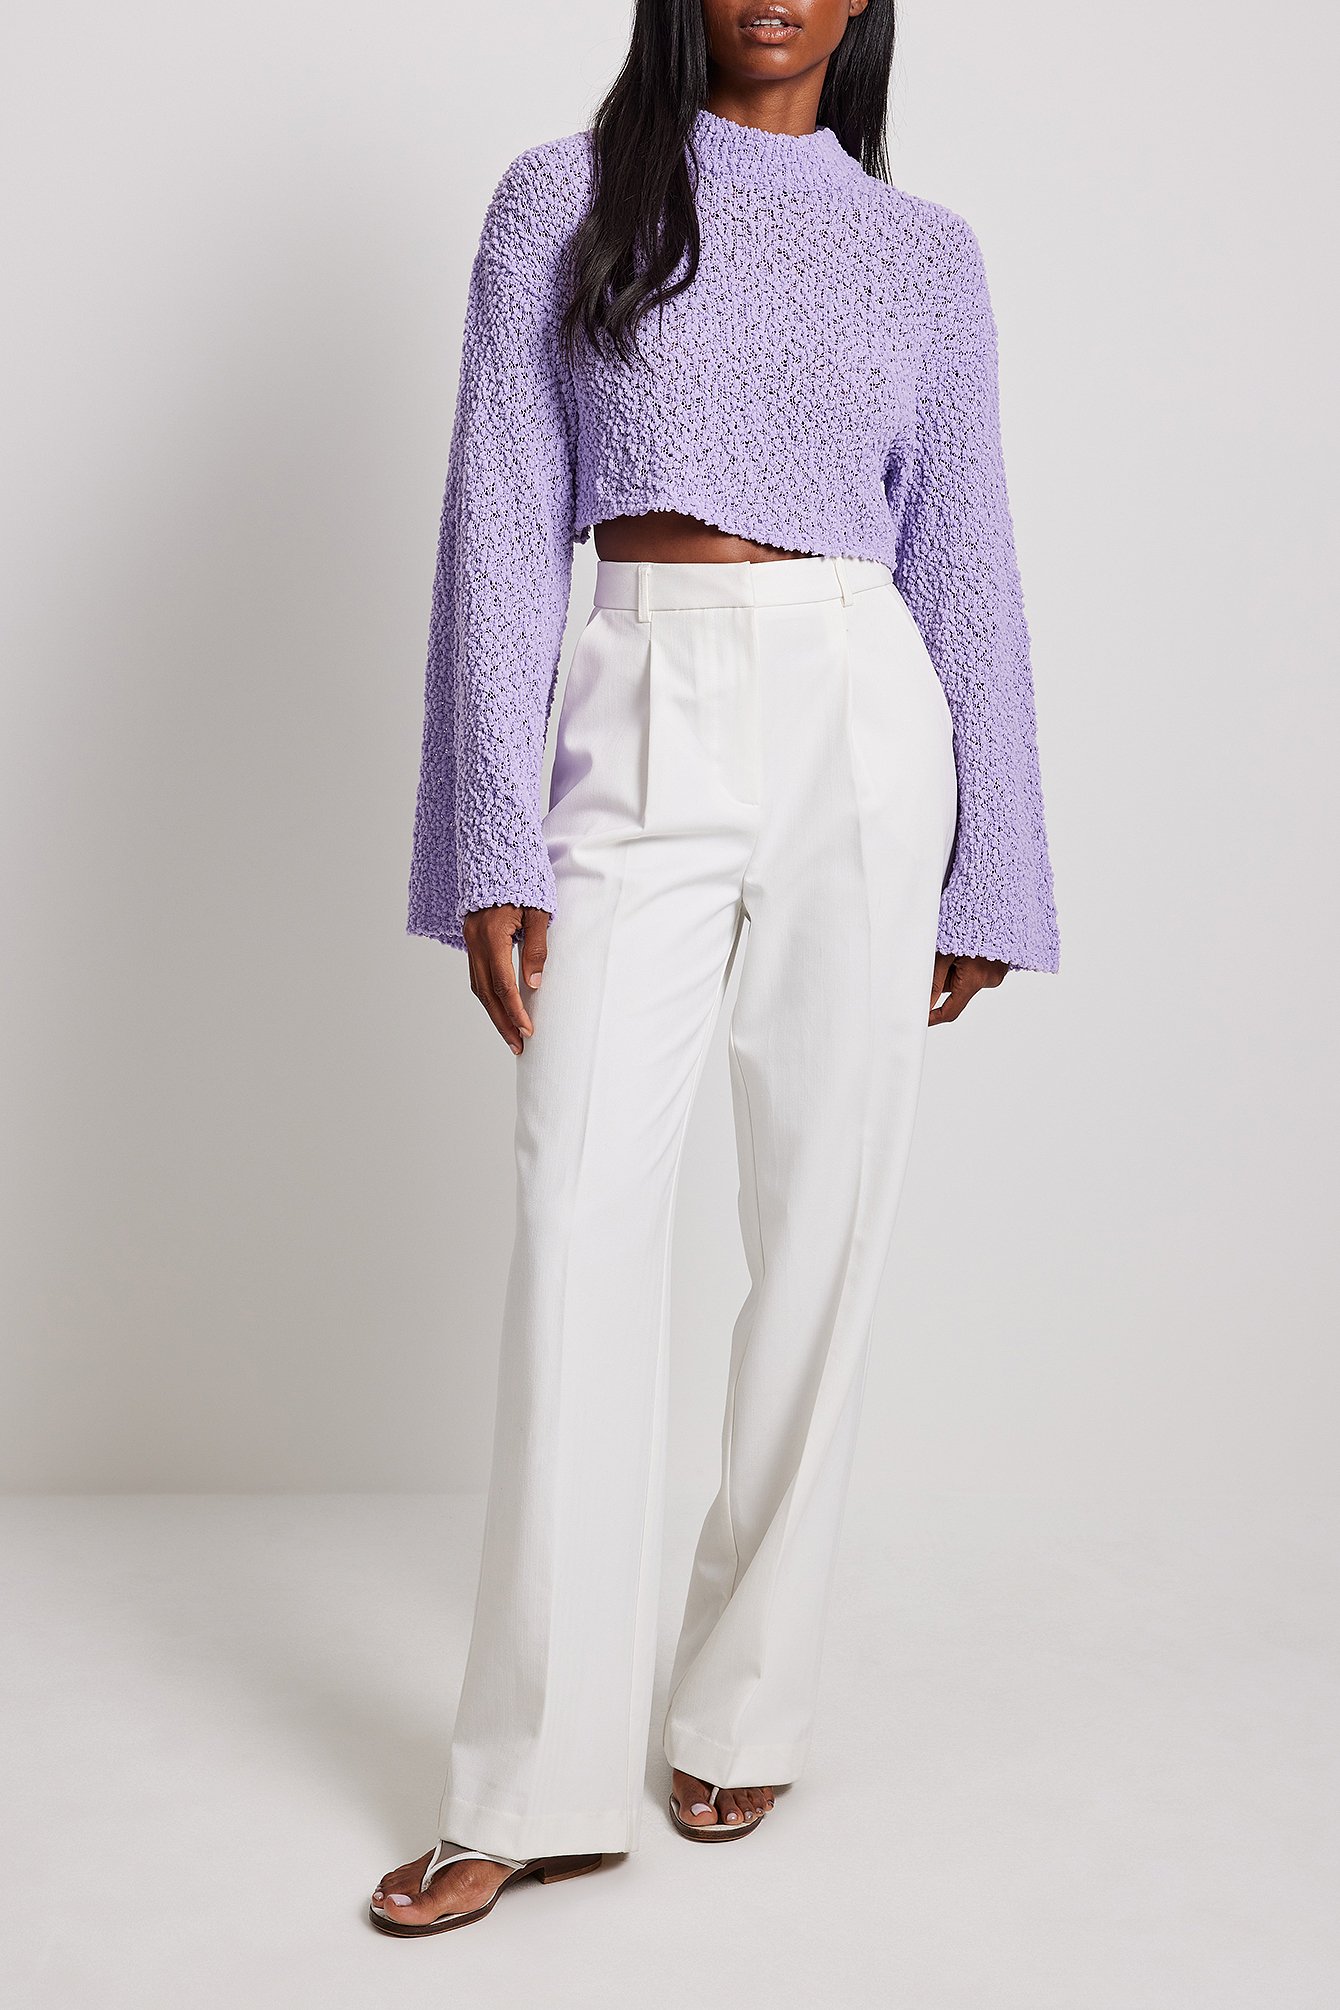 Winter White Relaxed Mid Waist Suit Pants